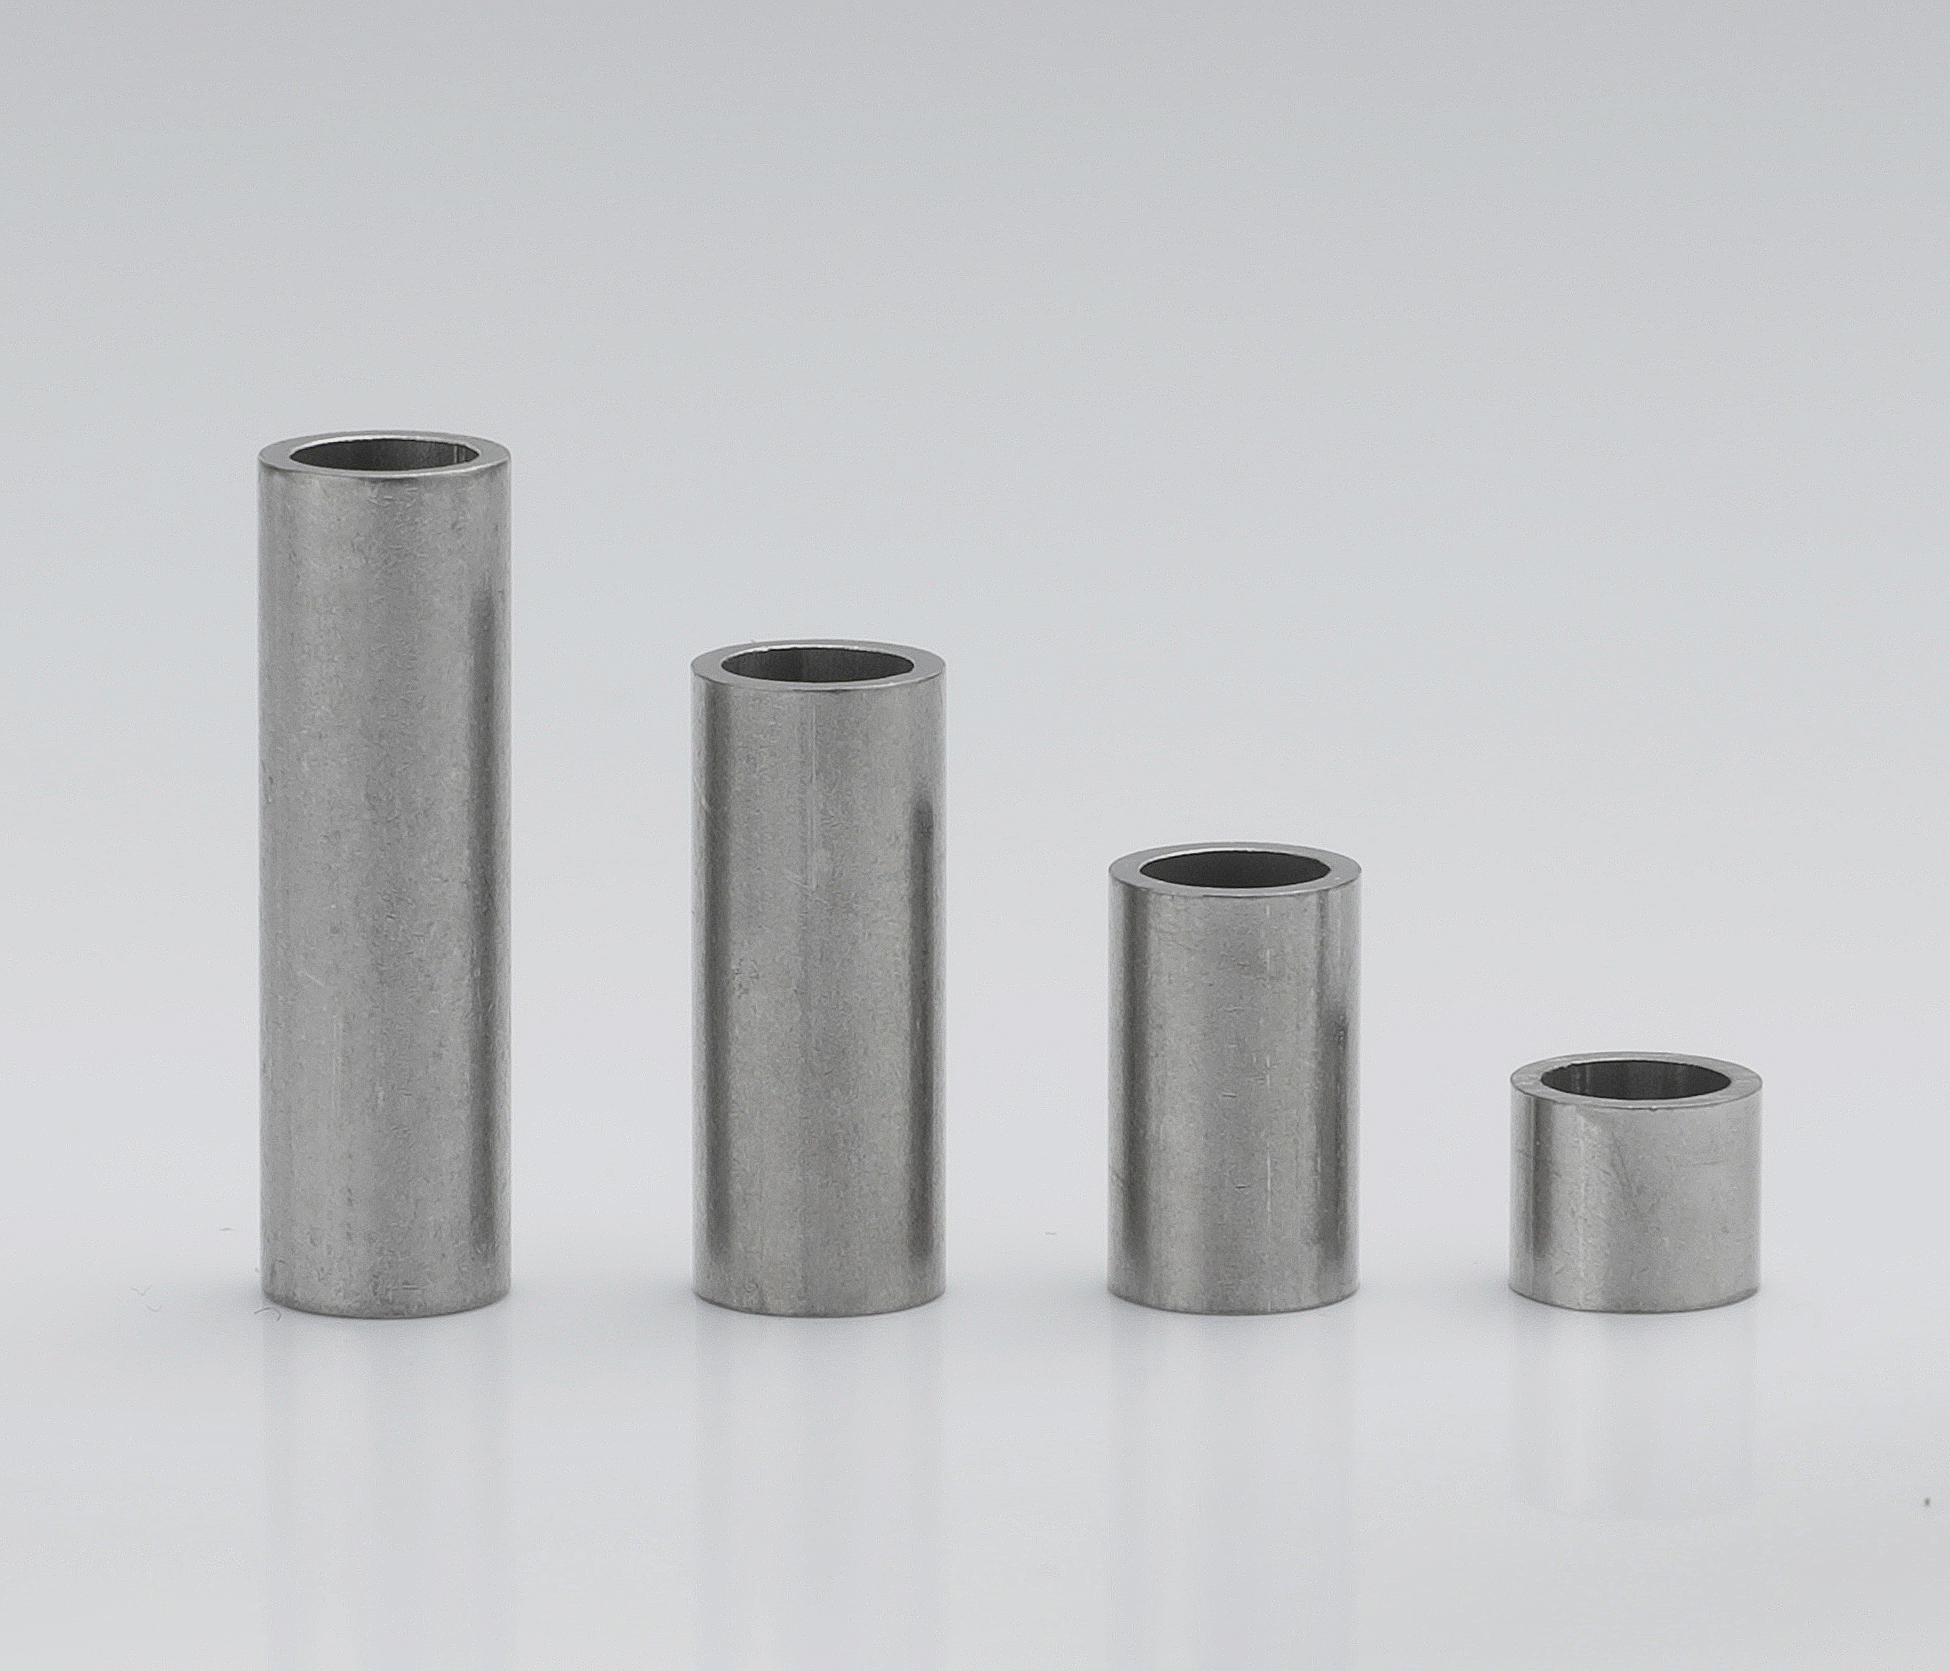 Stainless steel sleeves 6x4,4x0,8 mm (up to M4)